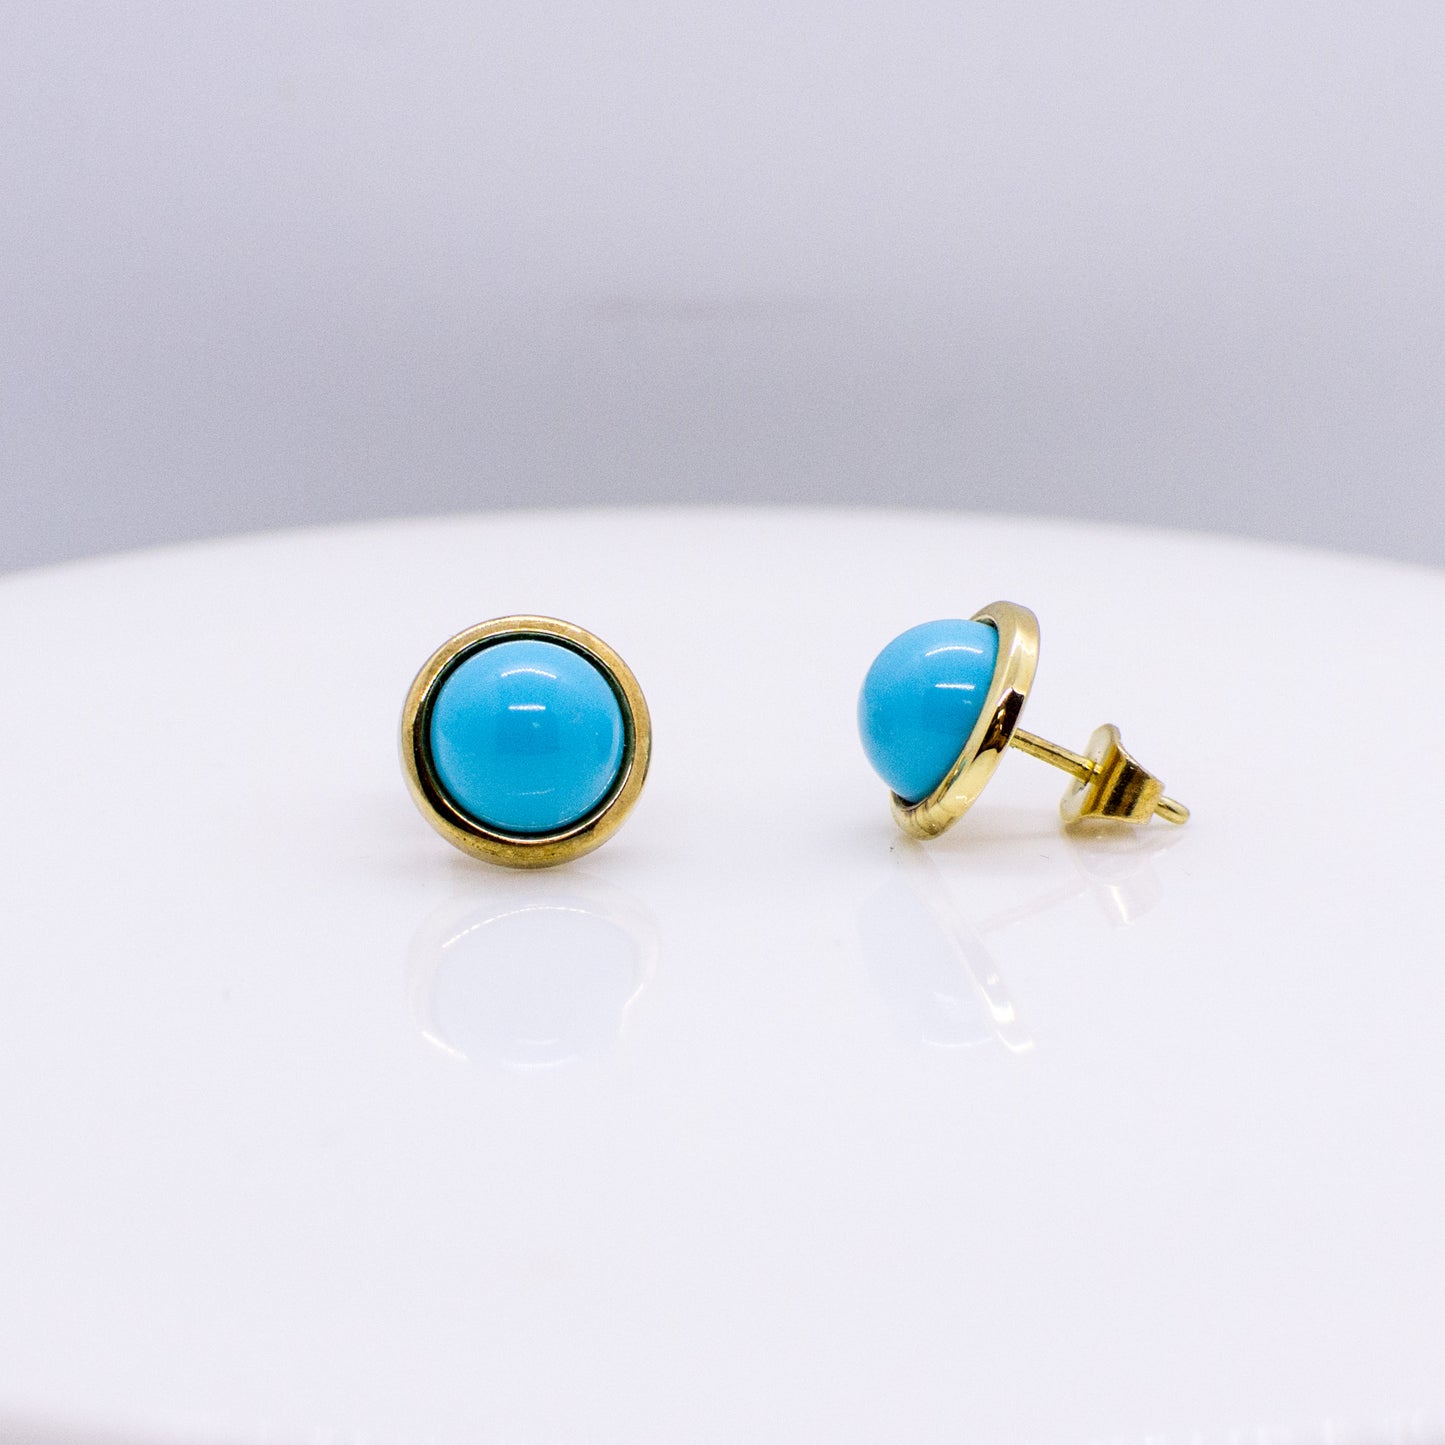 9ct Gold Round Turquoise Stud Earrings - John Ross Jewellers